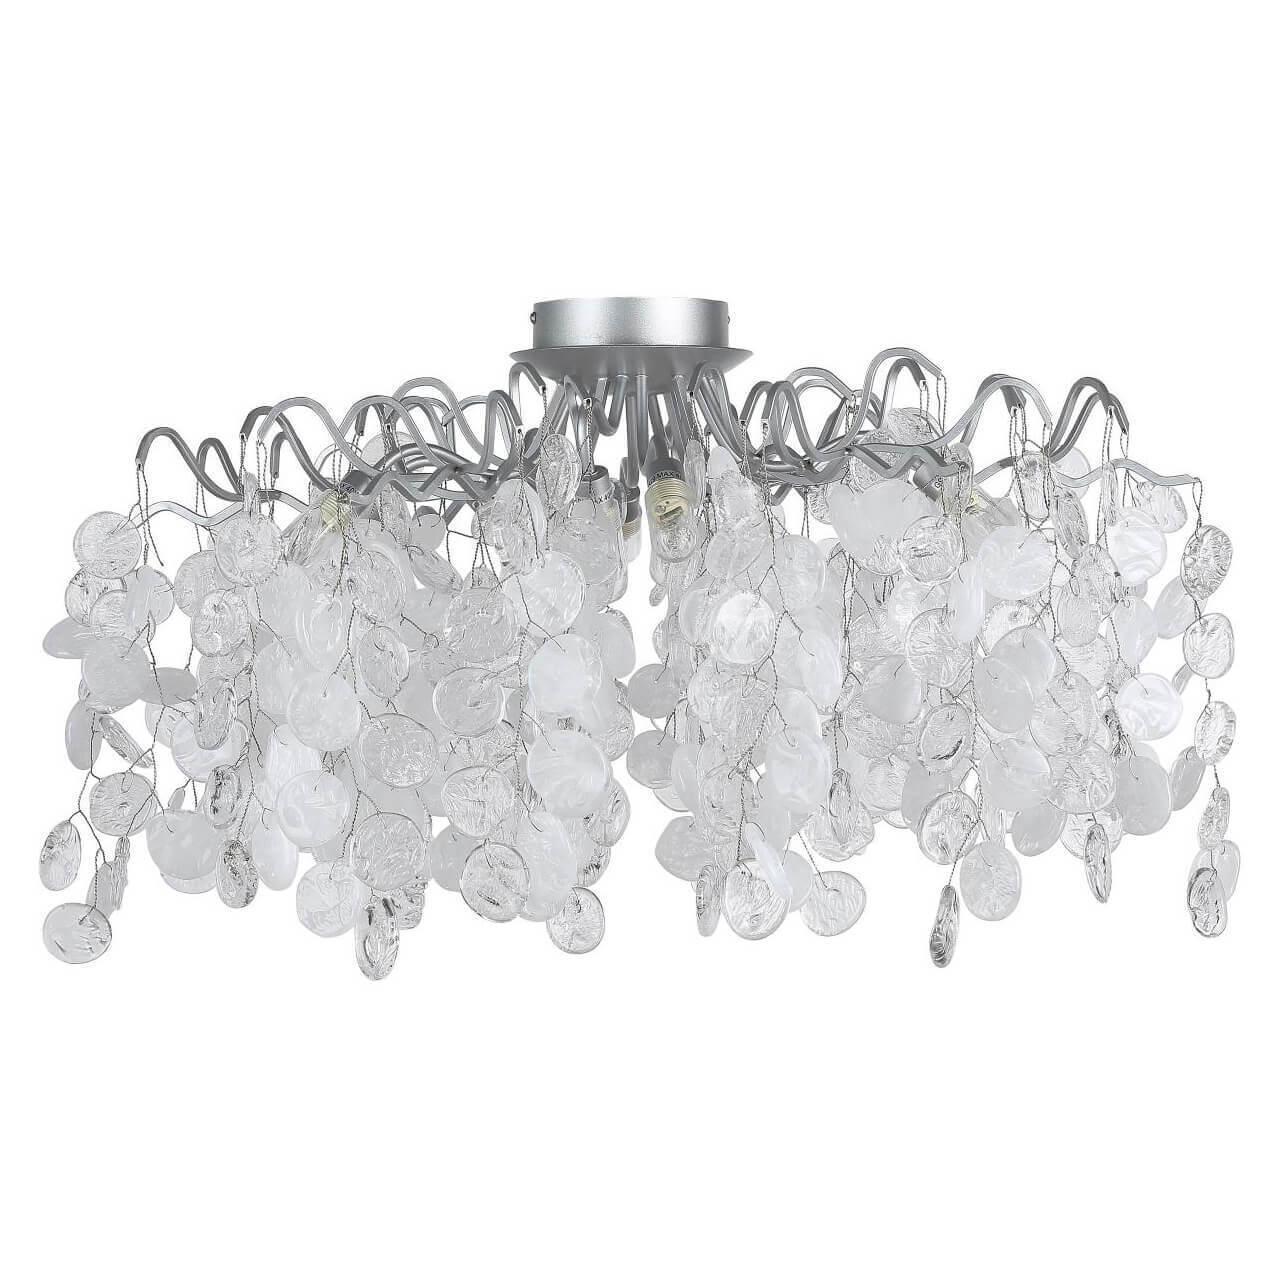   Crystal Lux Tenerife PL8 Silver